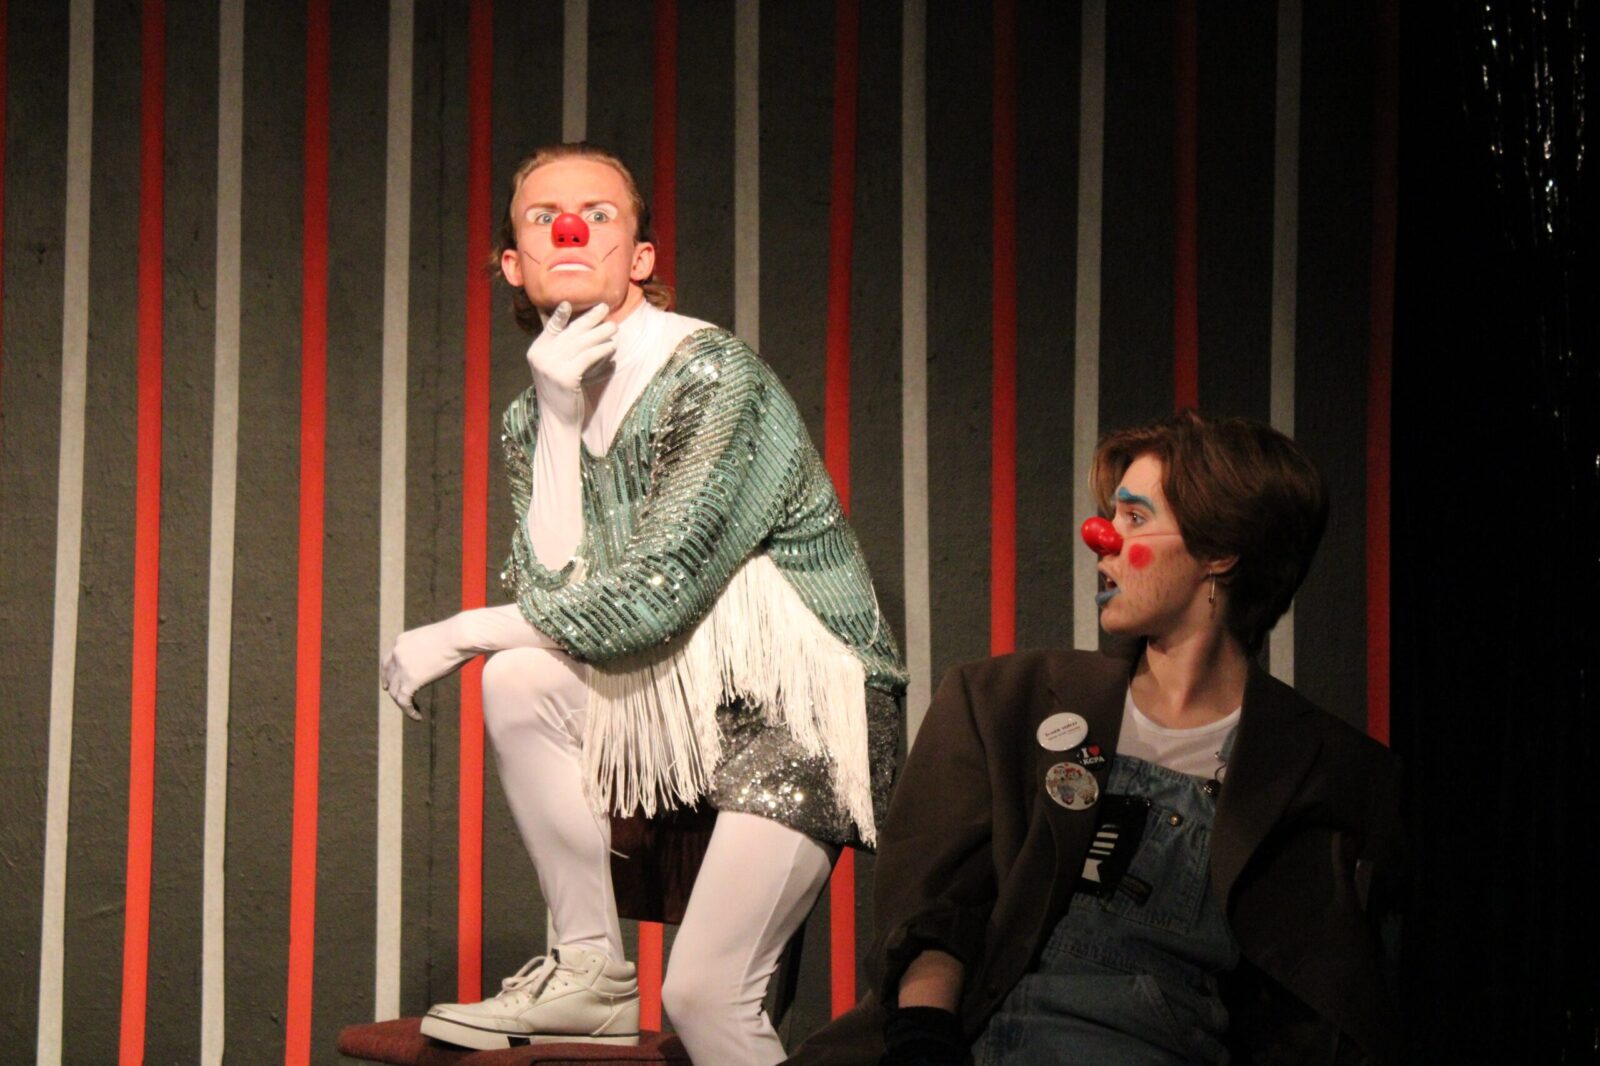 2 actors on stage striking a pose with clowning makeup on